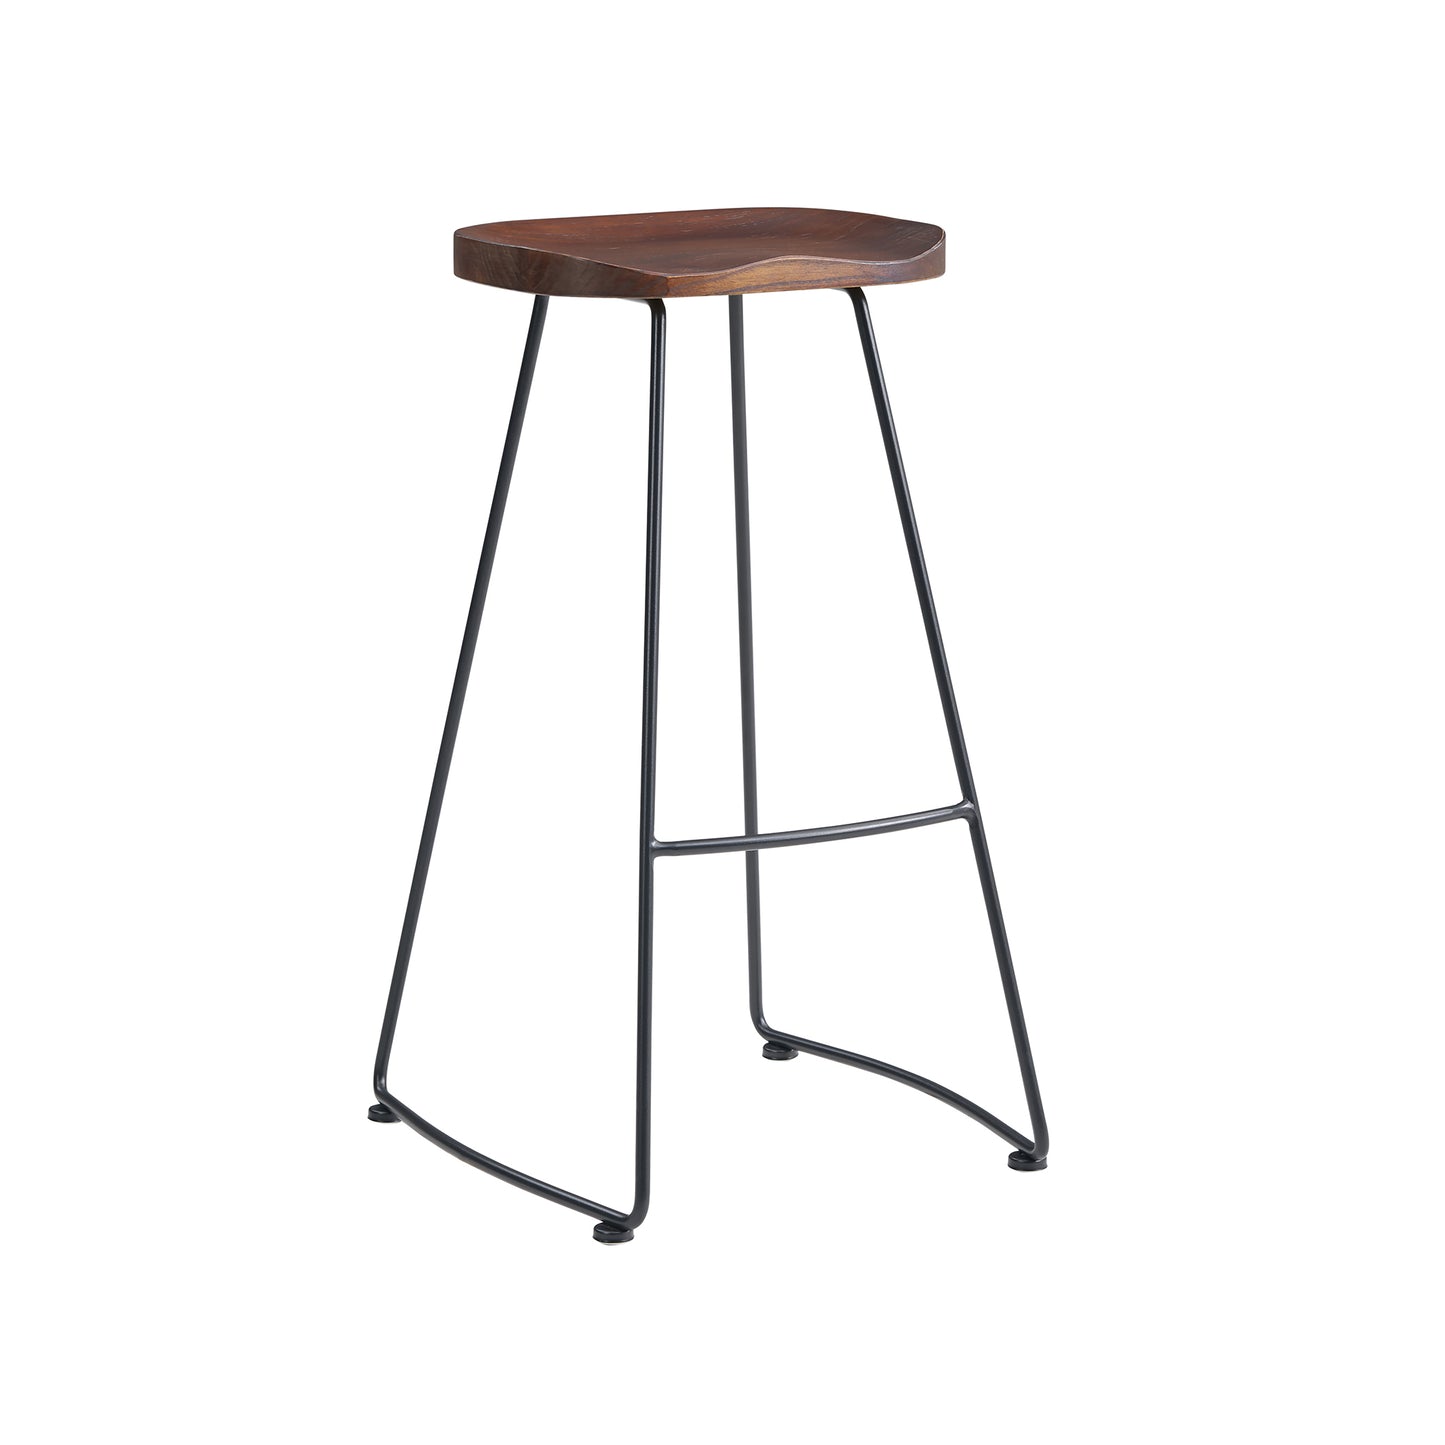 Load image into Gallery viewer, Antero Stool - Set of 2 BarBAR AND COUNTER STOOL Eurostyle  Bar   Four Hands, Mid Century Modern Furniture, Old Bones Furniture Company, Old Bones Co, Modern Mid Century, Designer Furniture, https://www.oldbonesco.com/
